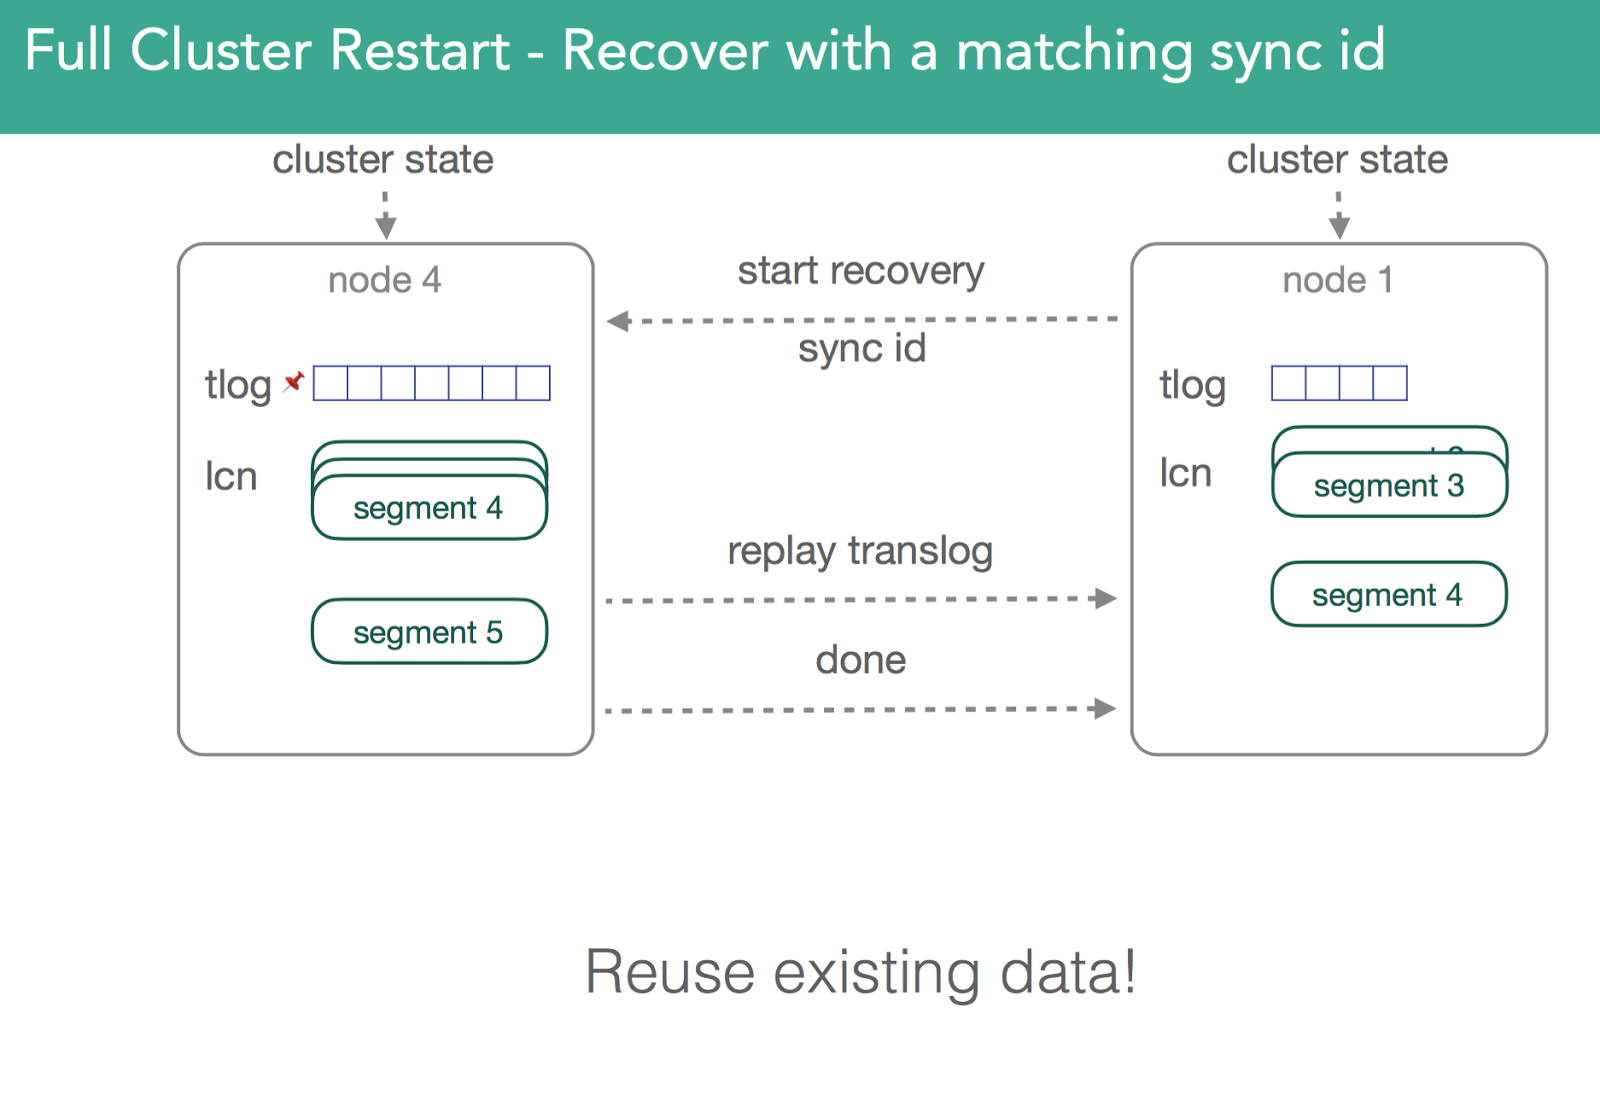 Full Cluster Restart - Recover with a matching sync id